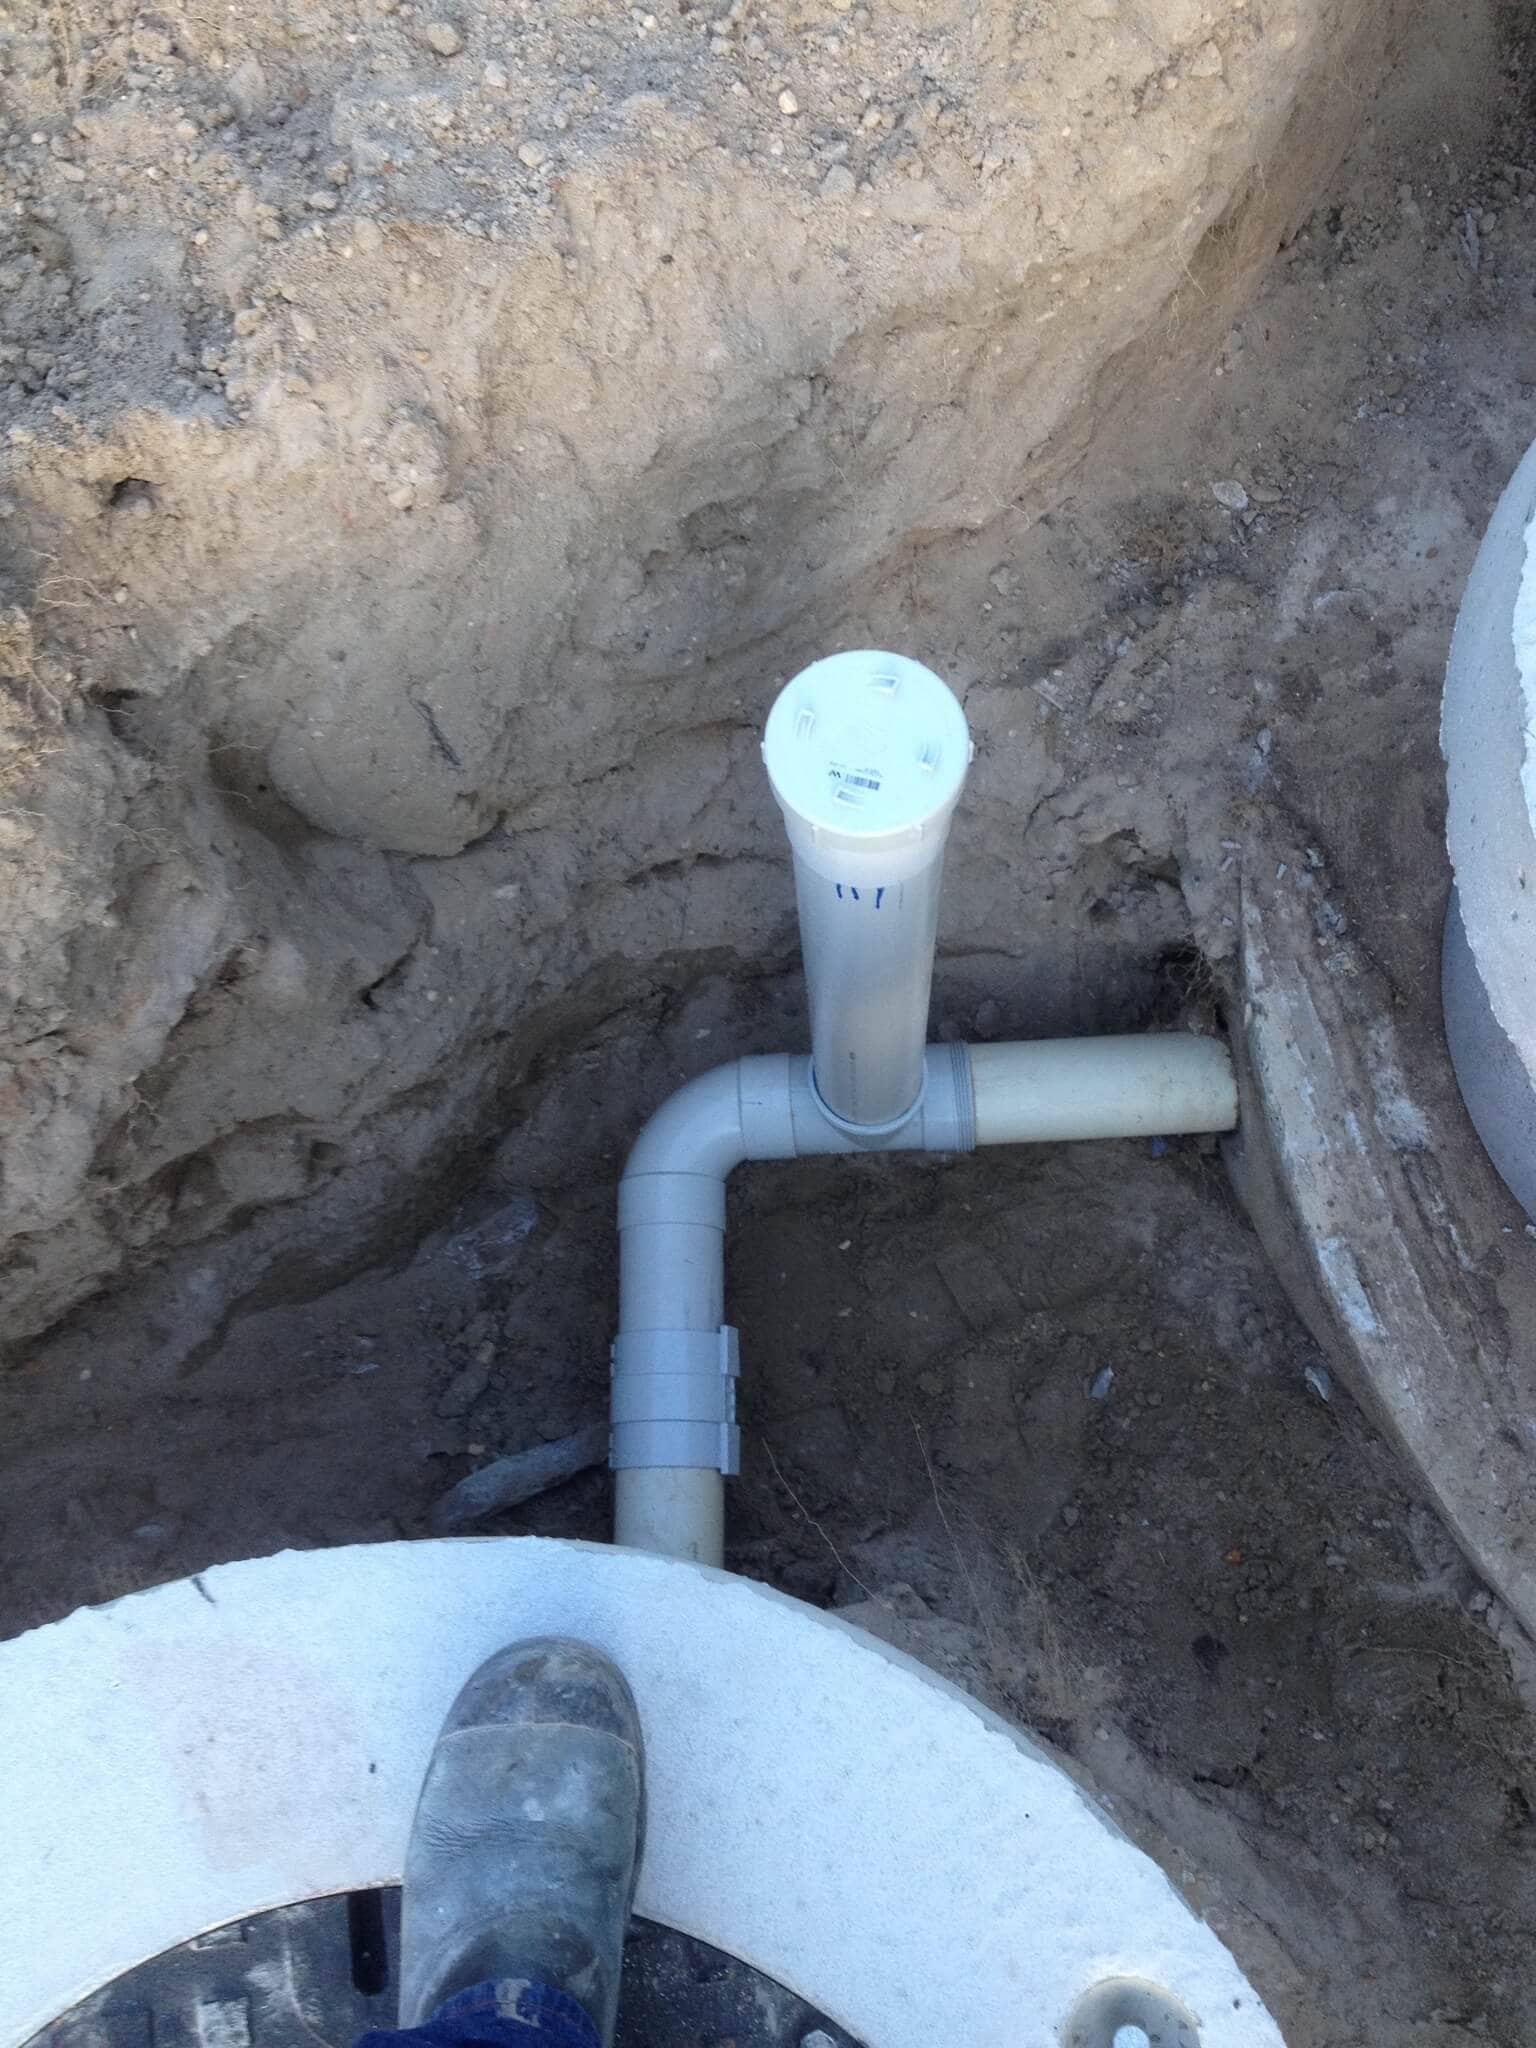 Everyday Plumbers Commercial Plumbing Services - Strata Plumbing Septics and Leach Drains 2147-1